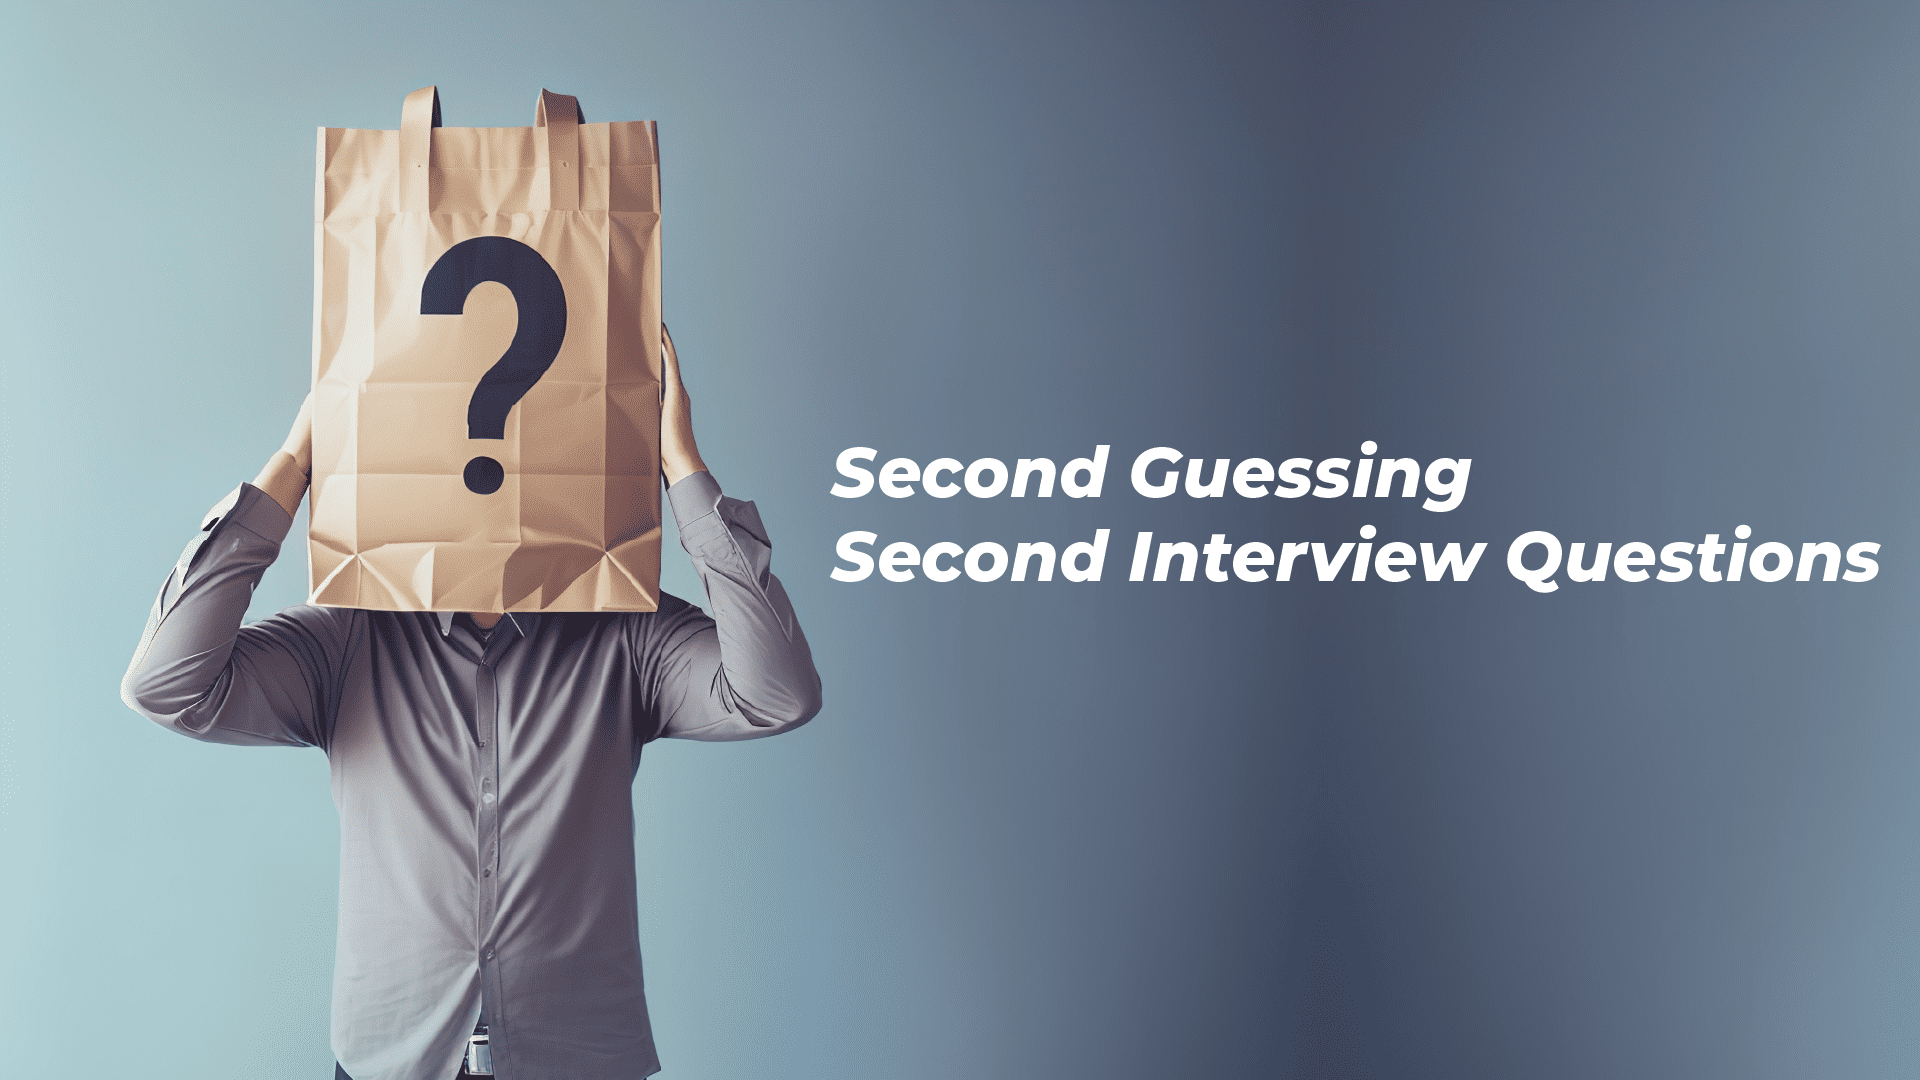 Second Guessing Second Interview Questions